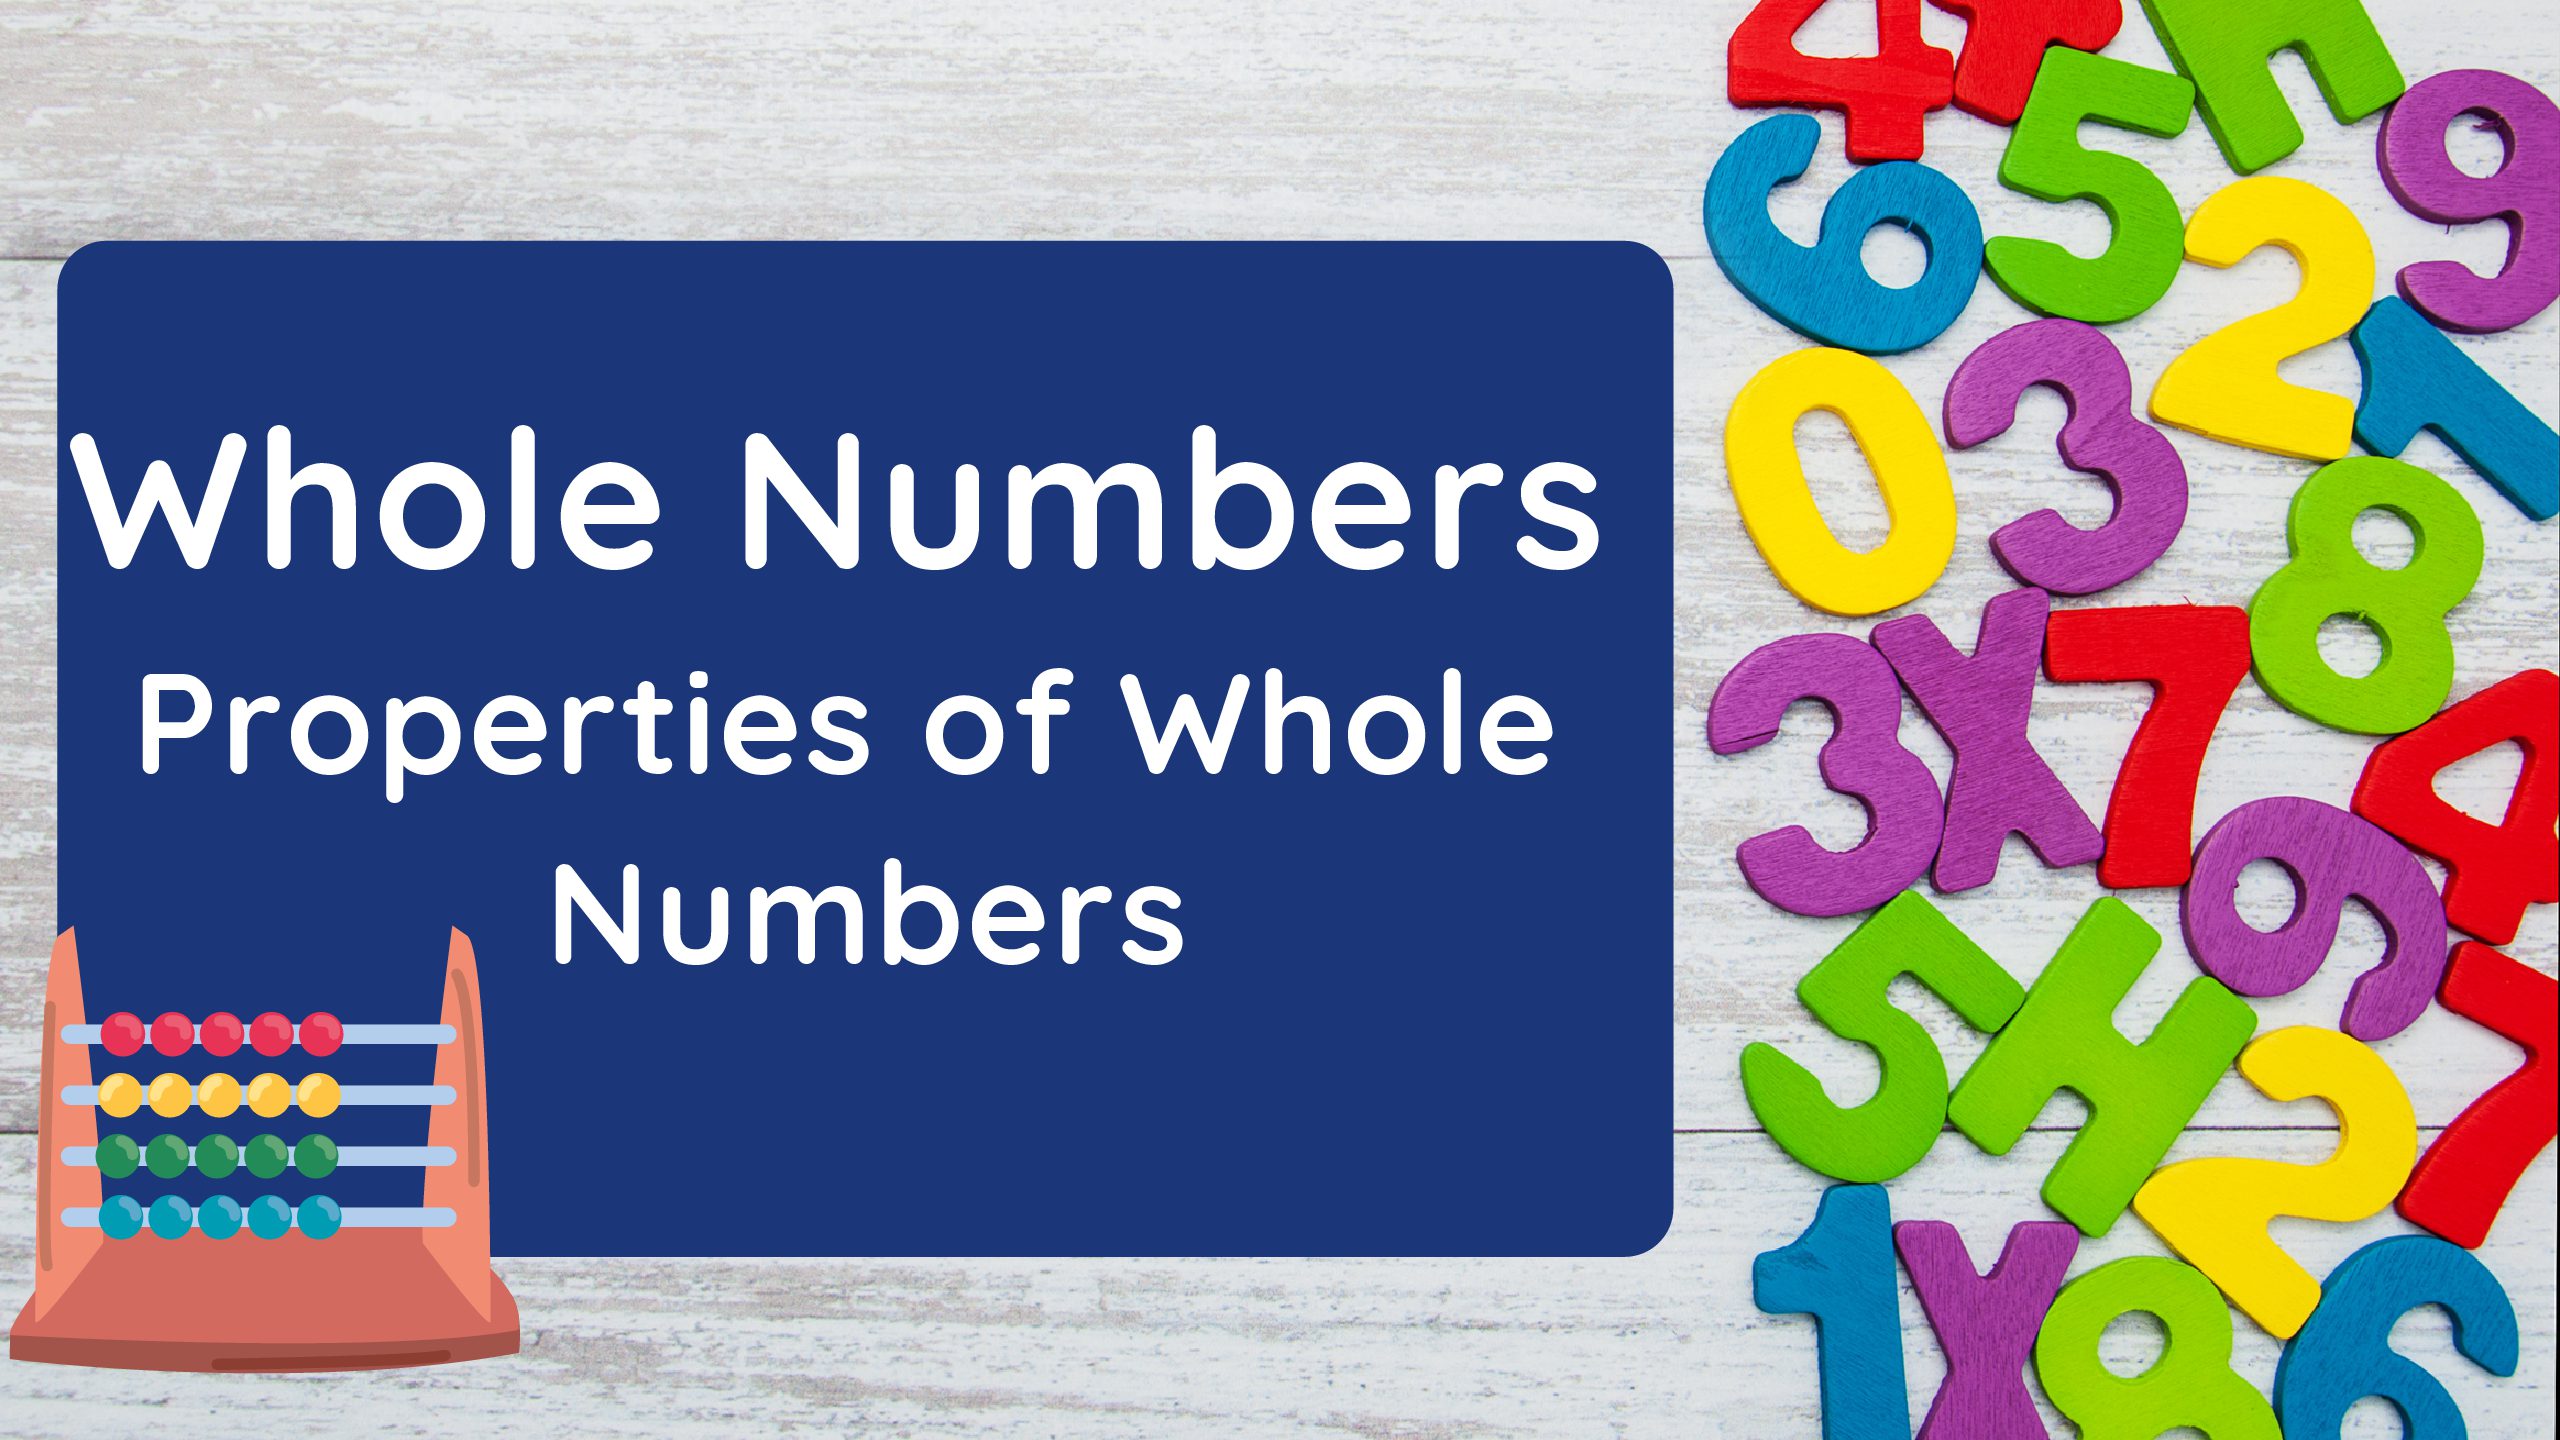 Whole Numbers- Properties of Whole Numbers (1)